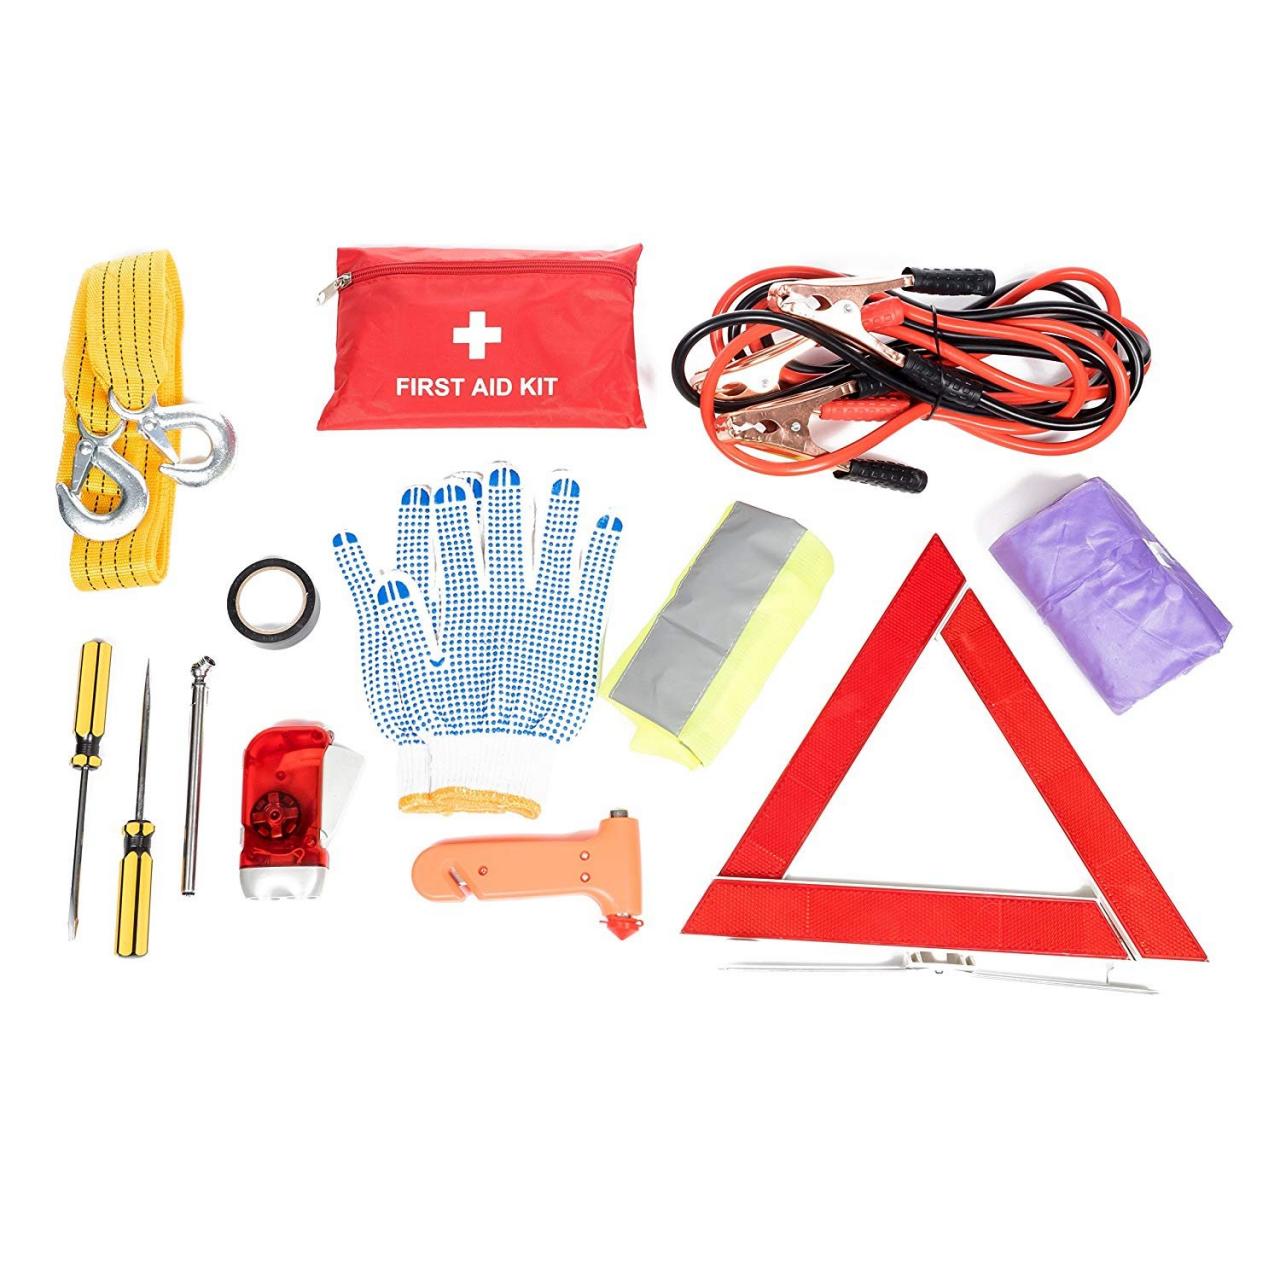 How To Prepare A Vehicle Emergency Kit - Hallman Motors Limited